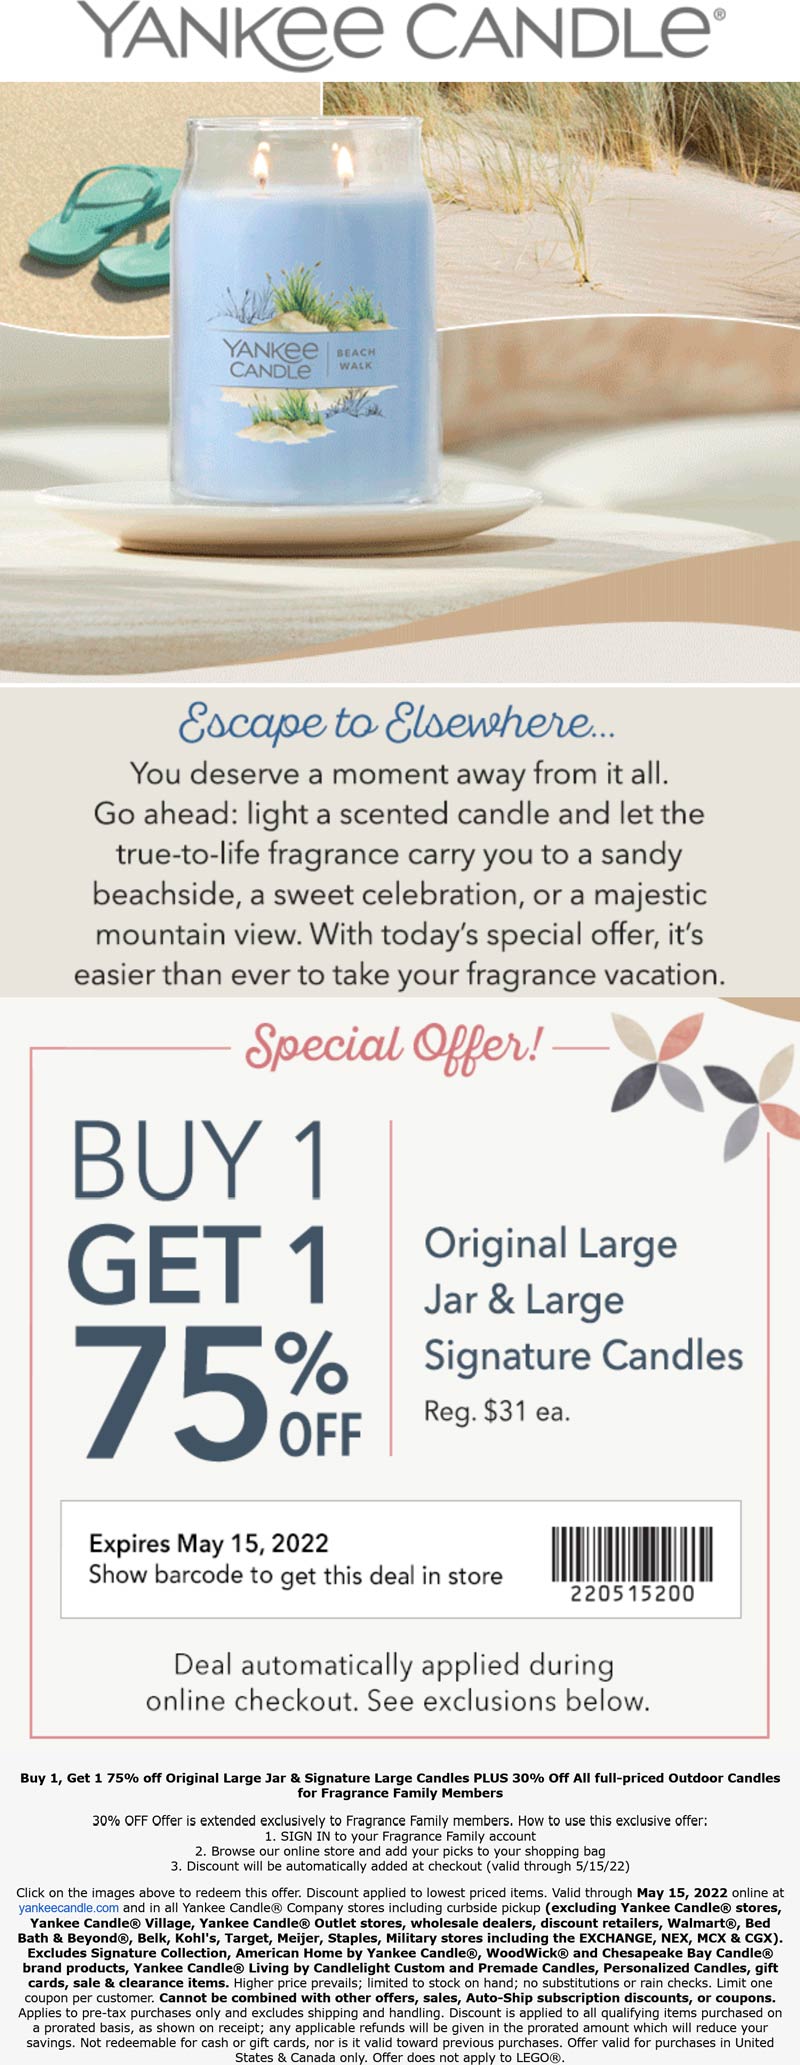 Yankee Candle stores Coupon  Second large candle 75% off at Yankee Candle, ditto online #yankeecandle 